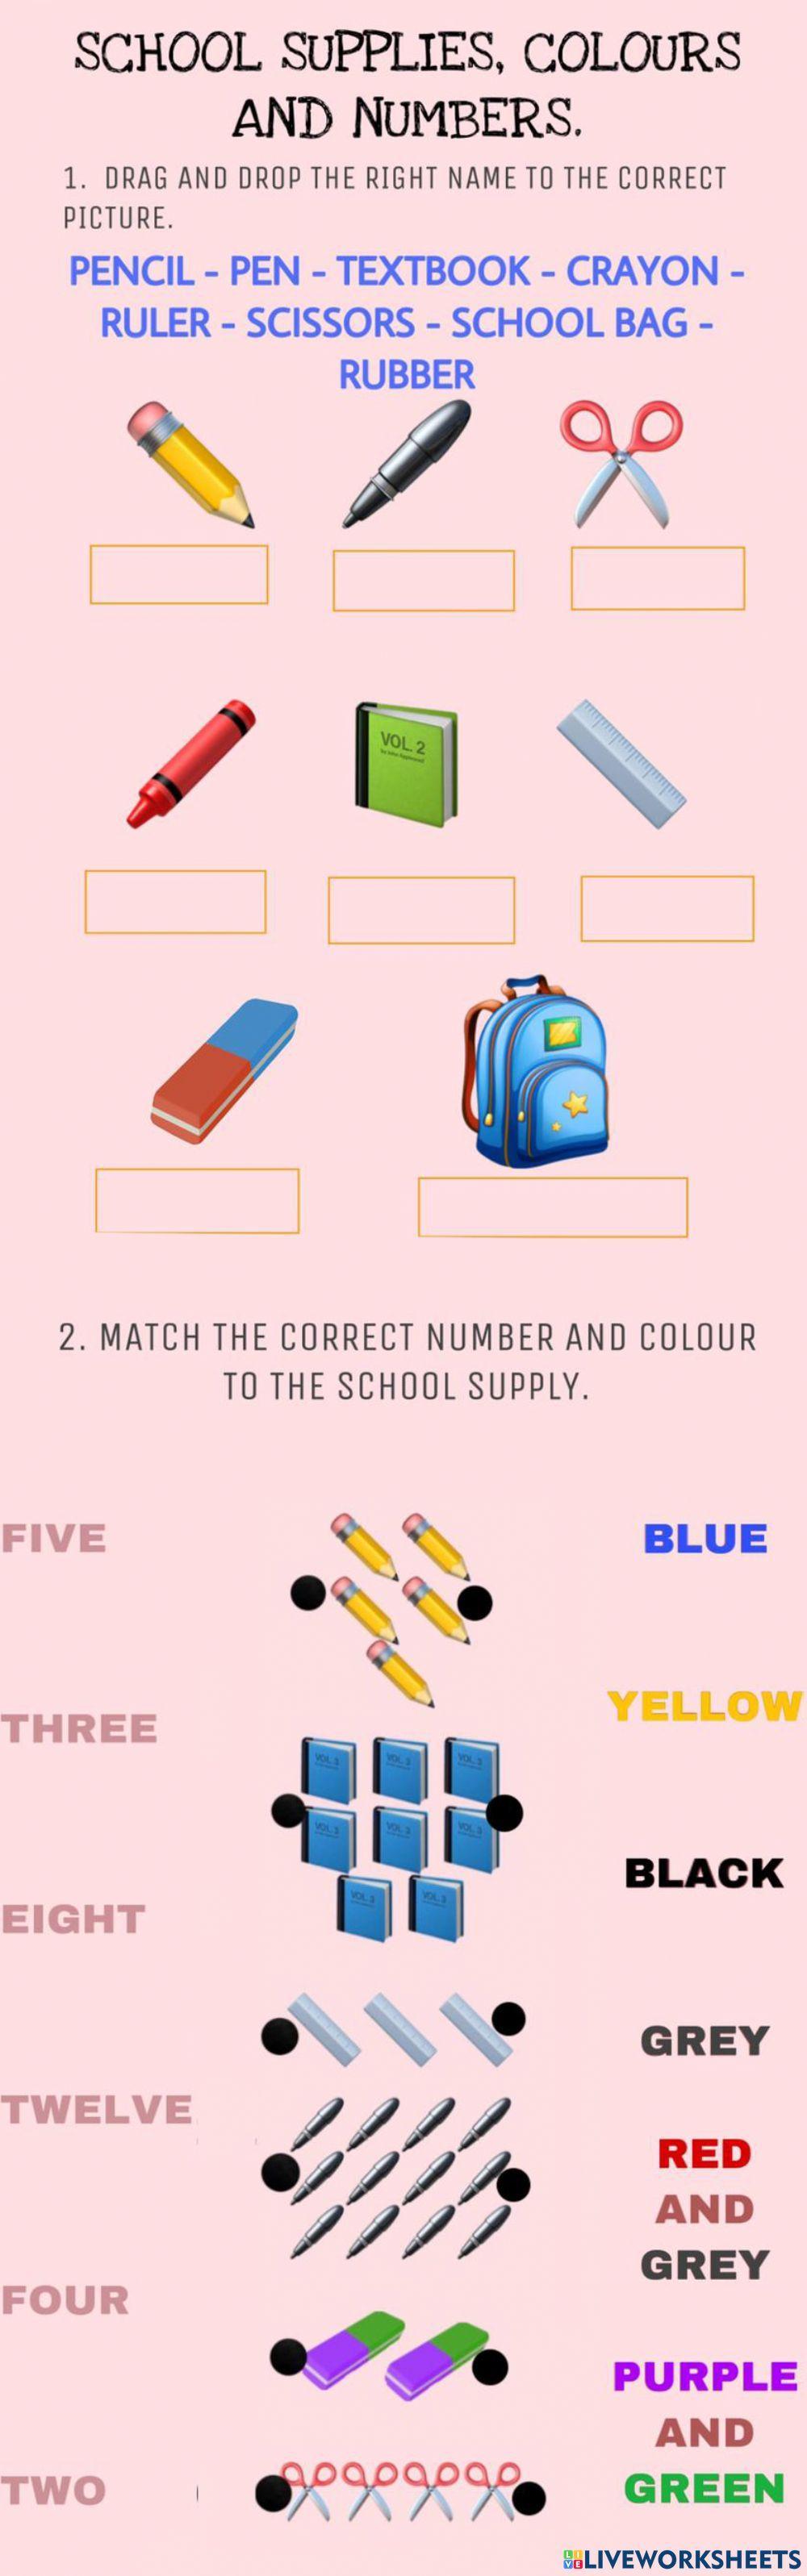 School supplies, colours and numbers!